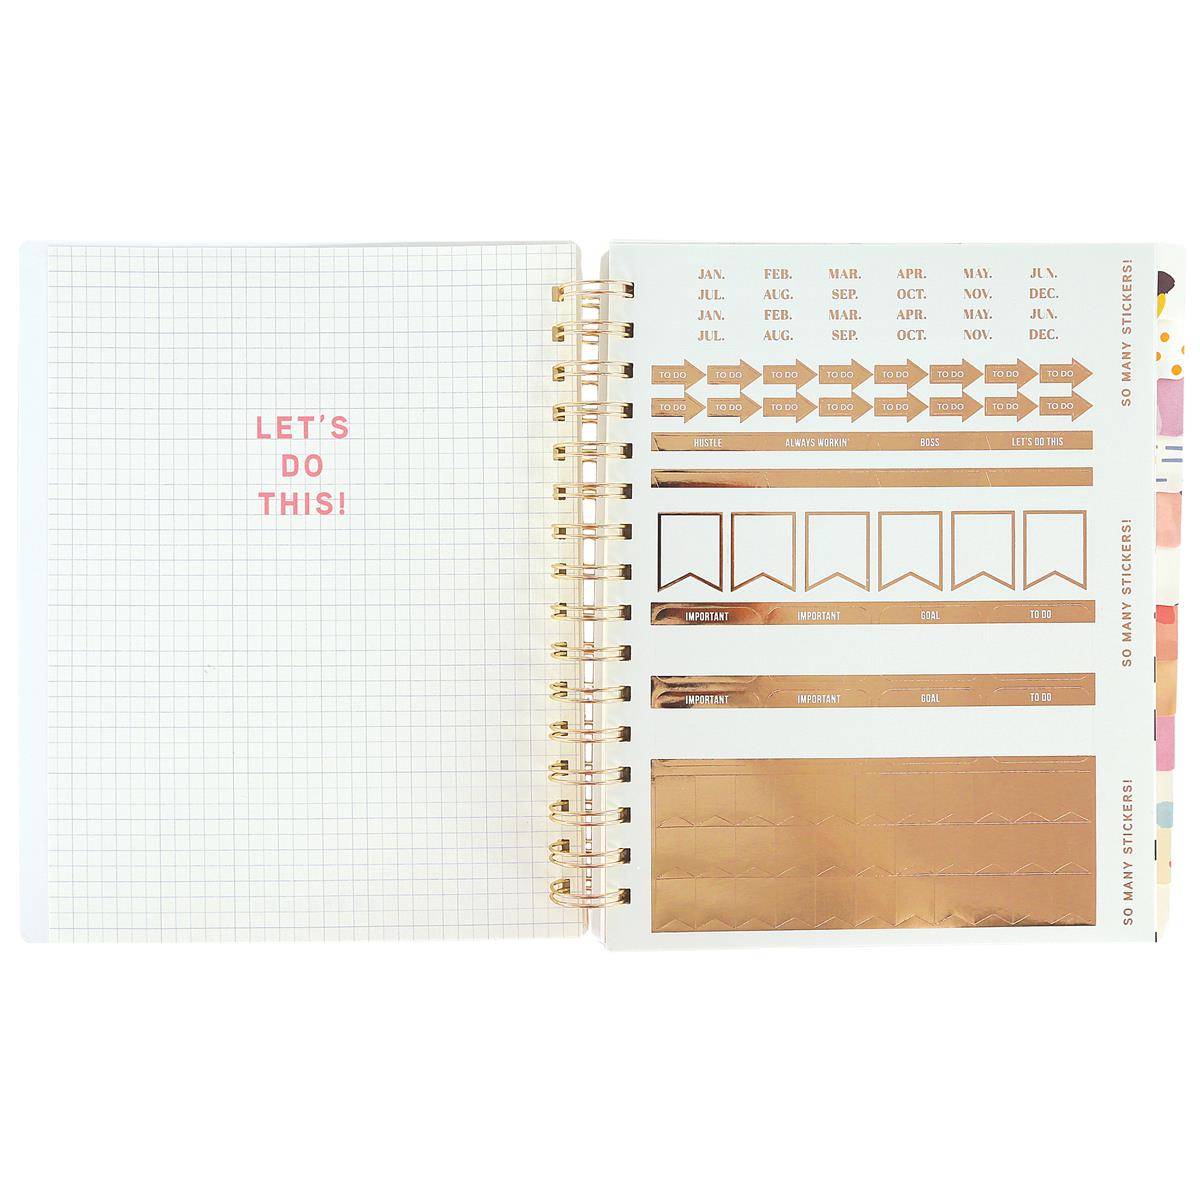 Last Call! Dear Weekend I Love You Spiral Undated Planner